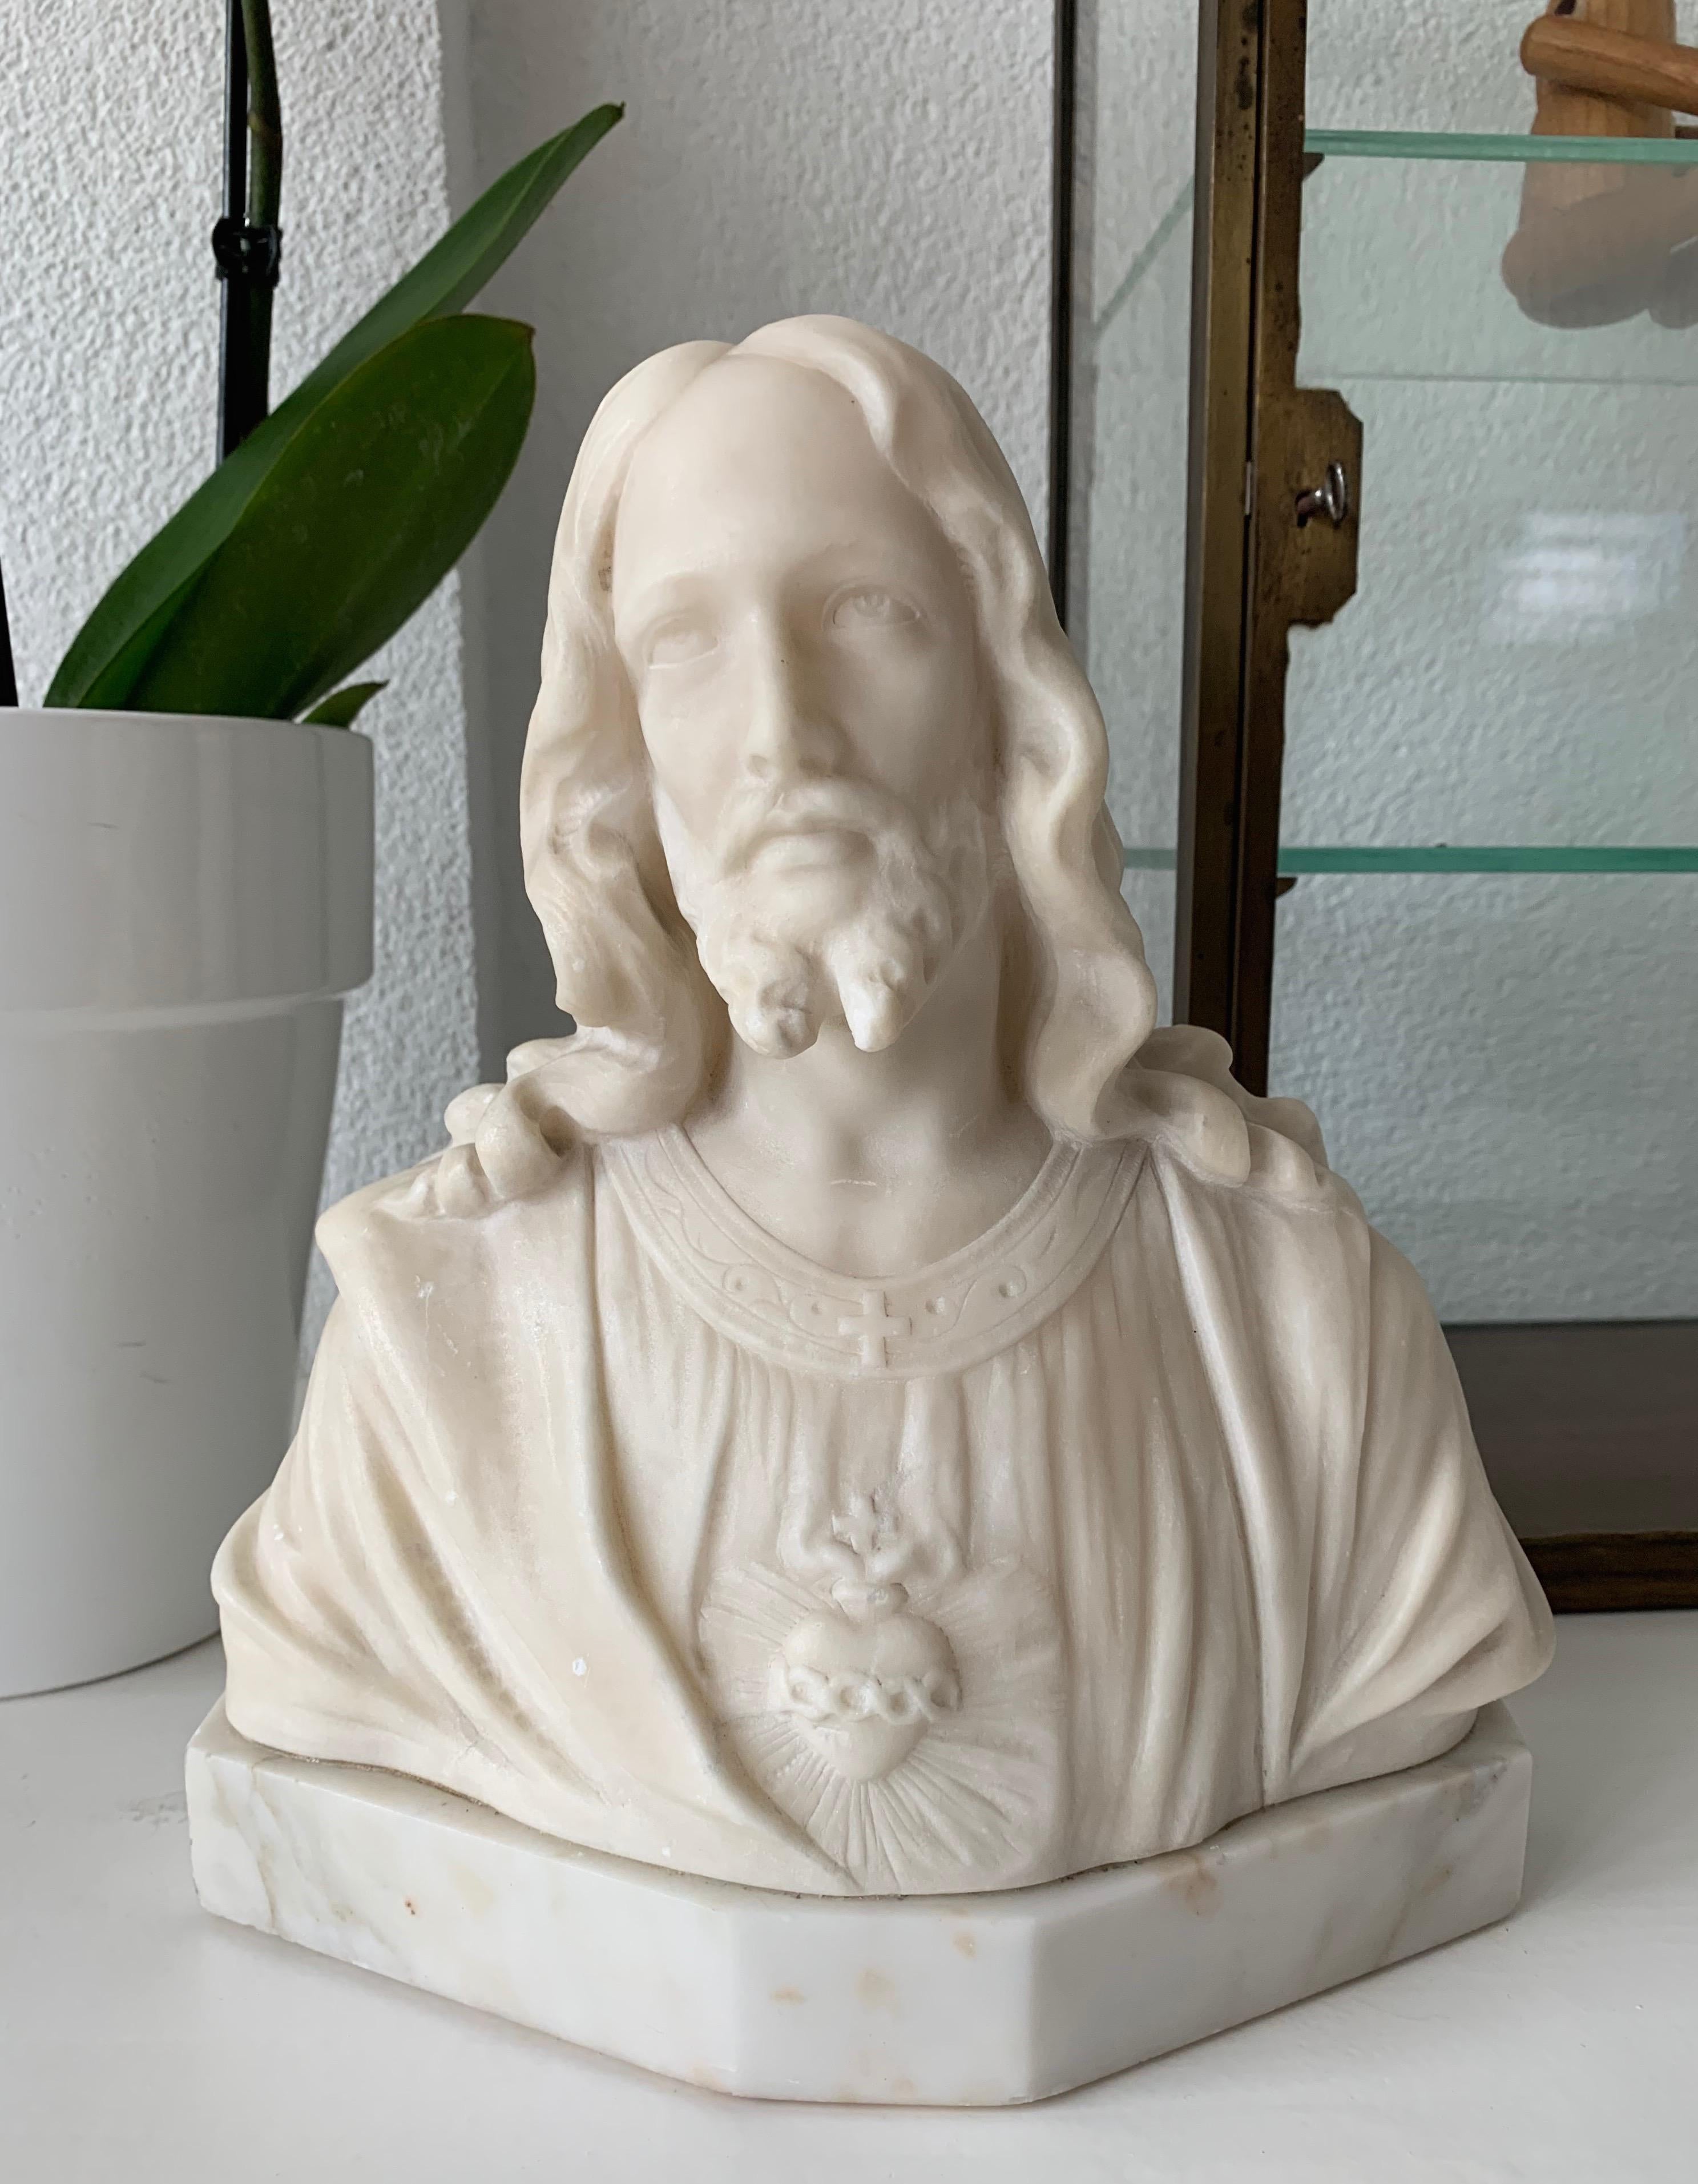 Early 1900s Signed Marble Sculpture / Bust of Jesus Christ on an Art Deco Base 8